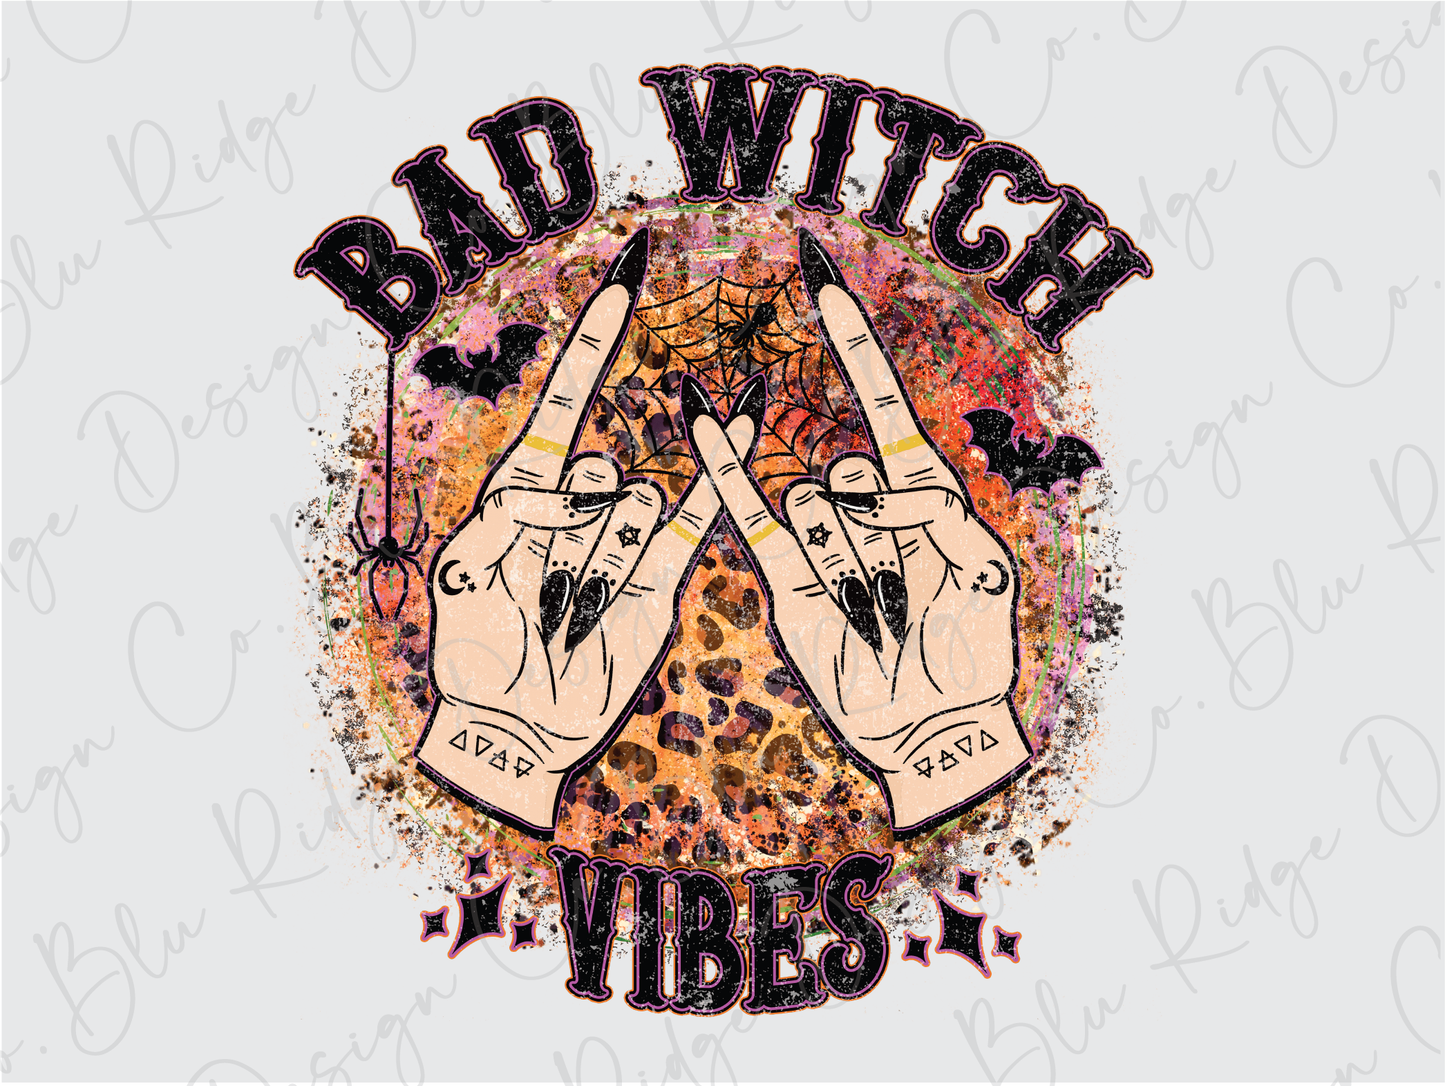 Bad Witch Vibes Halloween Leopard Print Design Direct To Film (DTF) Transfer